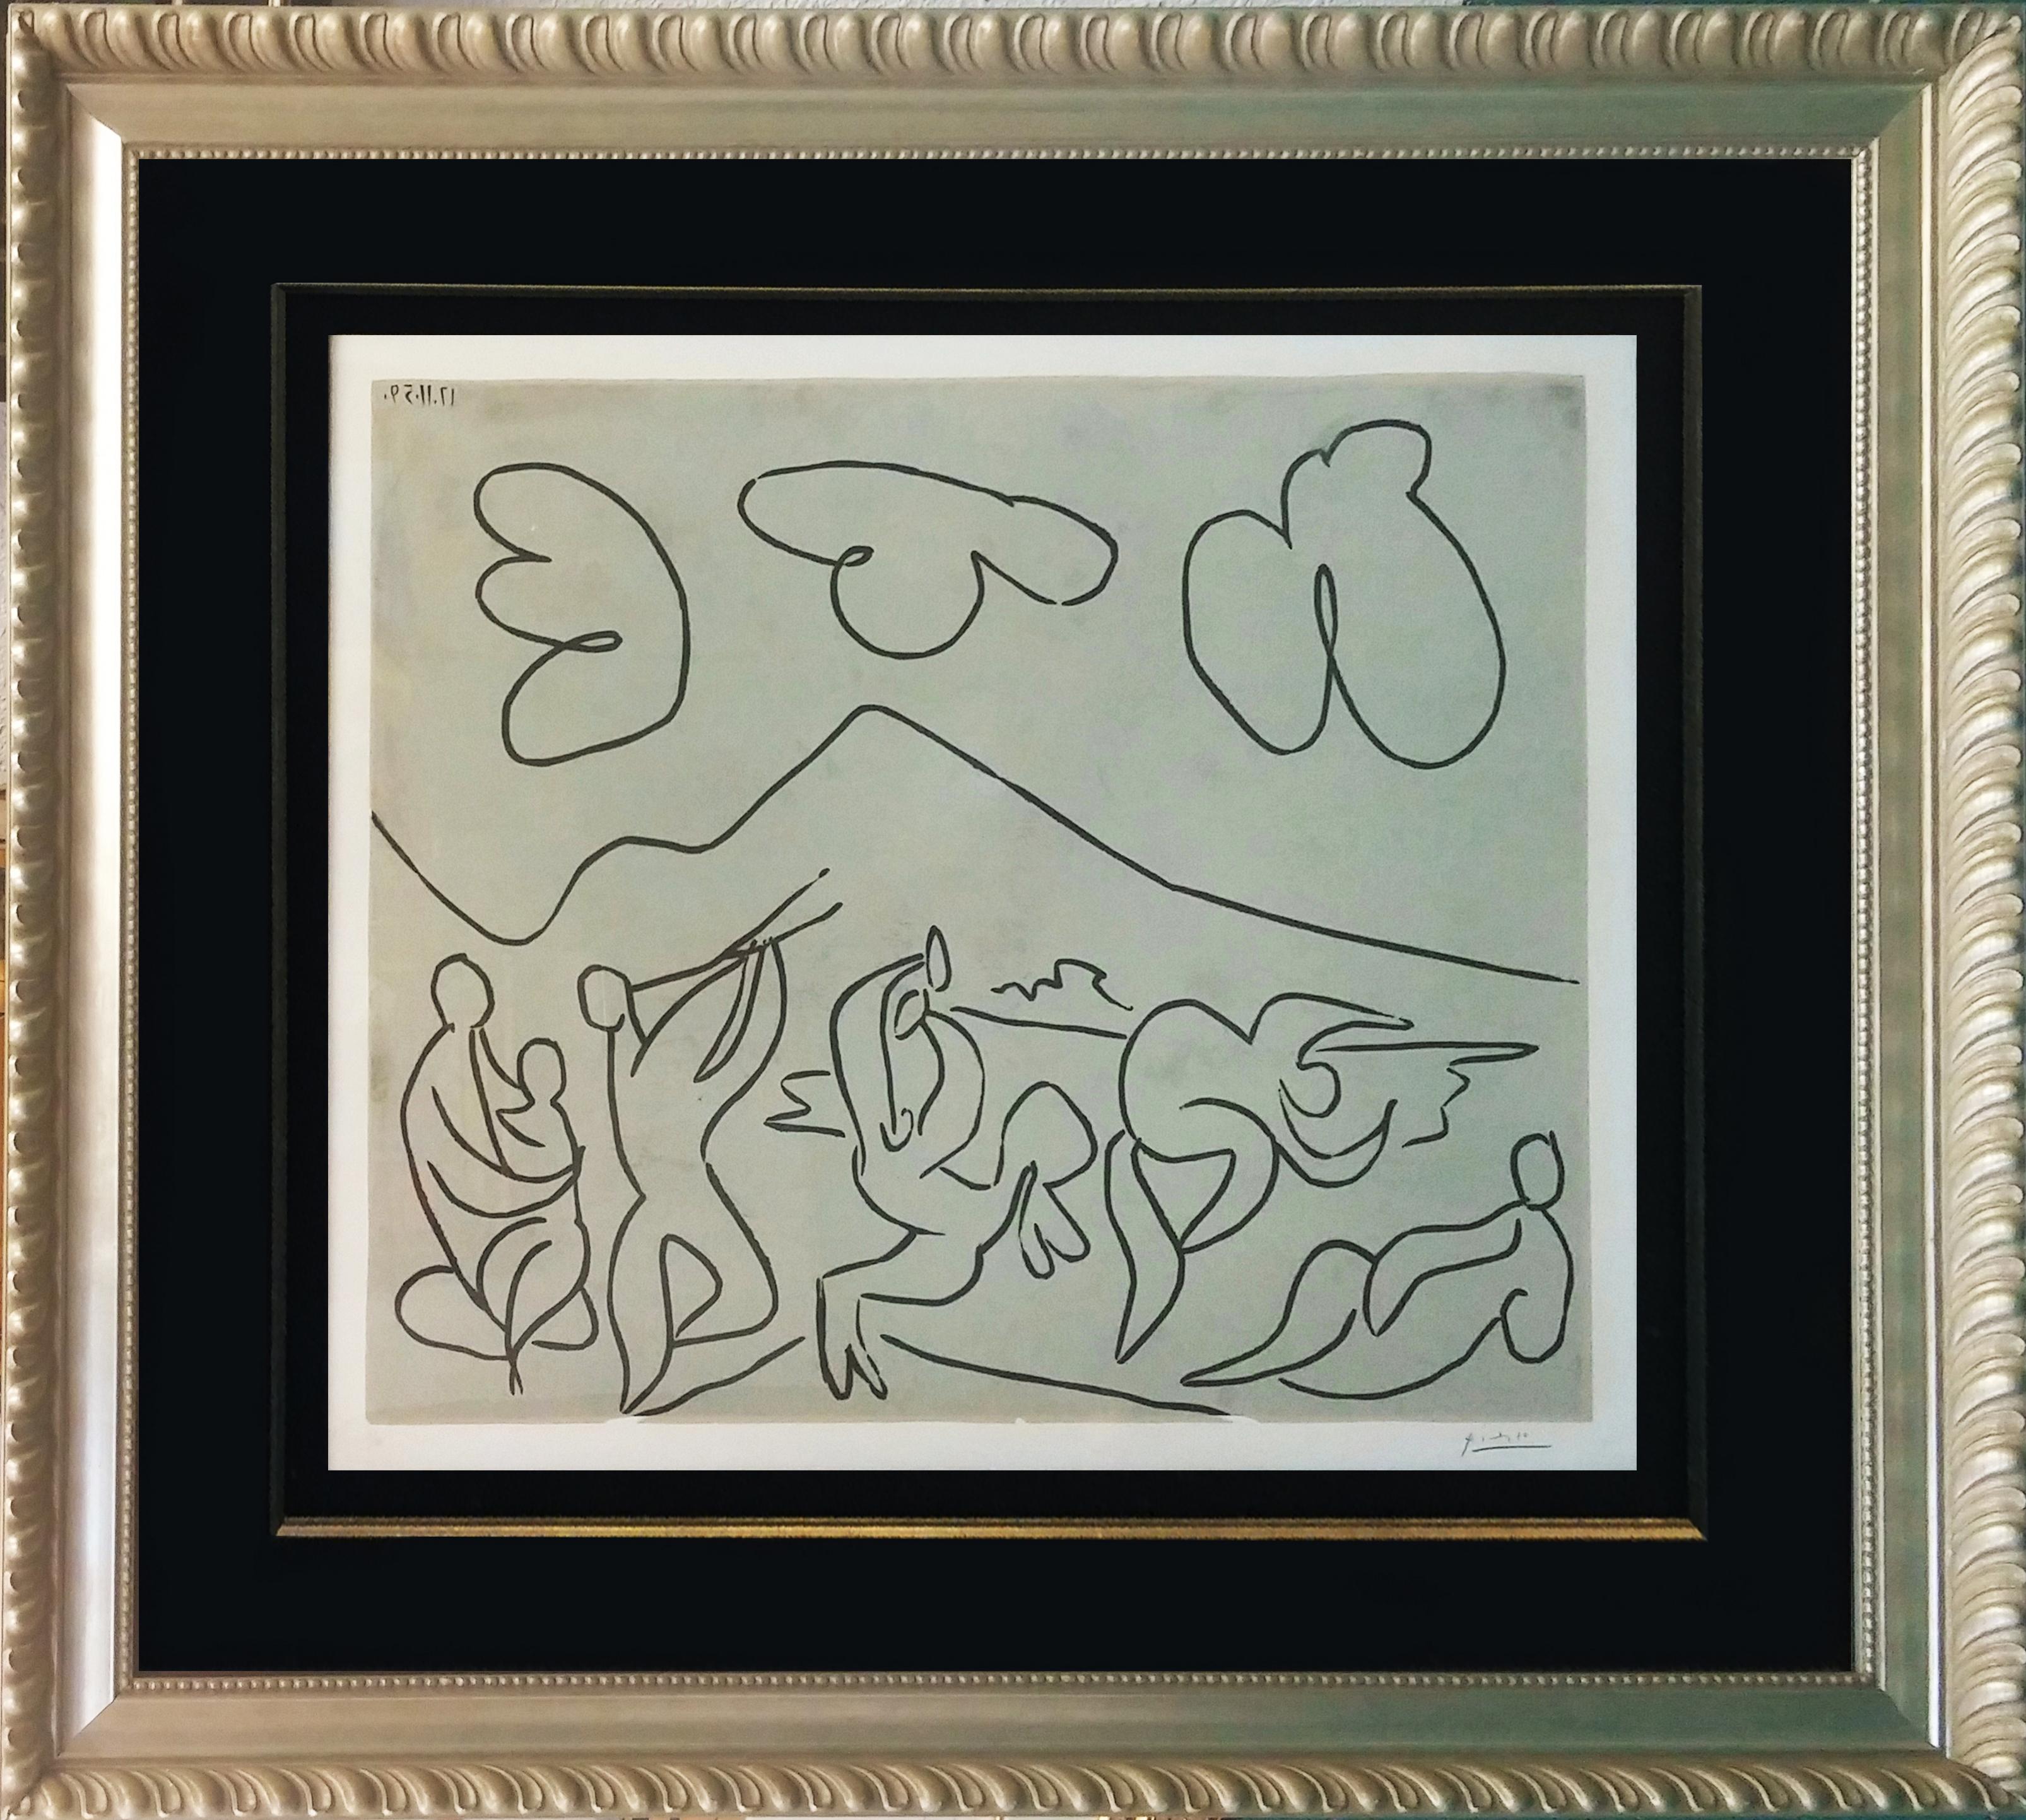 BACCHANALE (BLOCH 927) - Print by Pablo Picasso